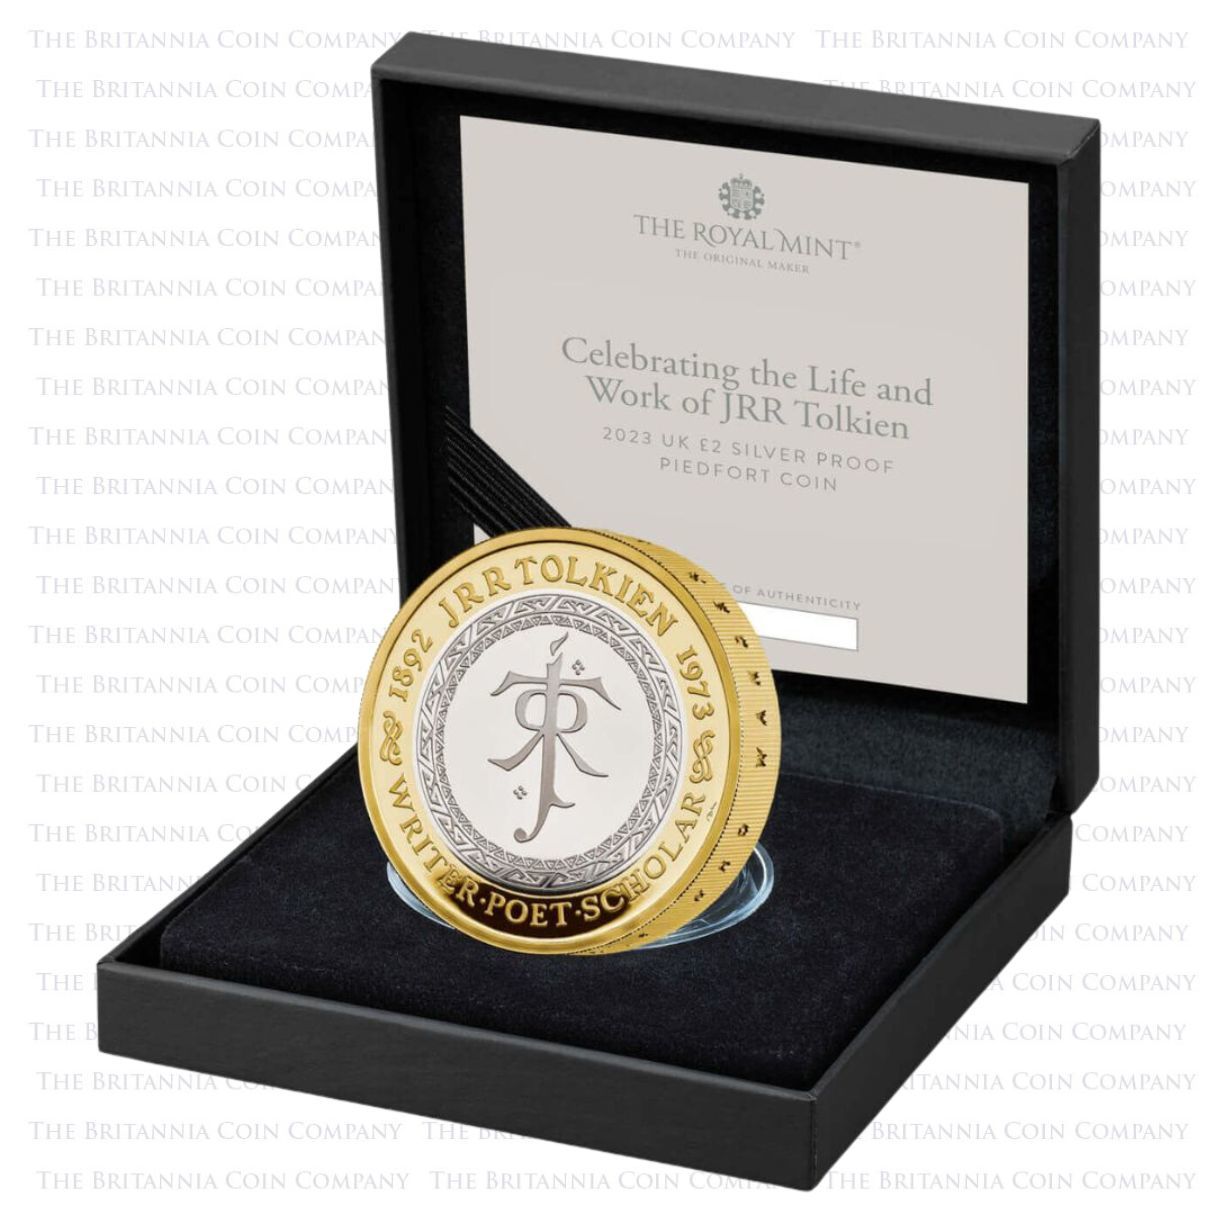 UK23JTPF 2023 J R R Tolkien Lord Of The Rings Two Pound Piedfort Silver Proof Coin Boxed